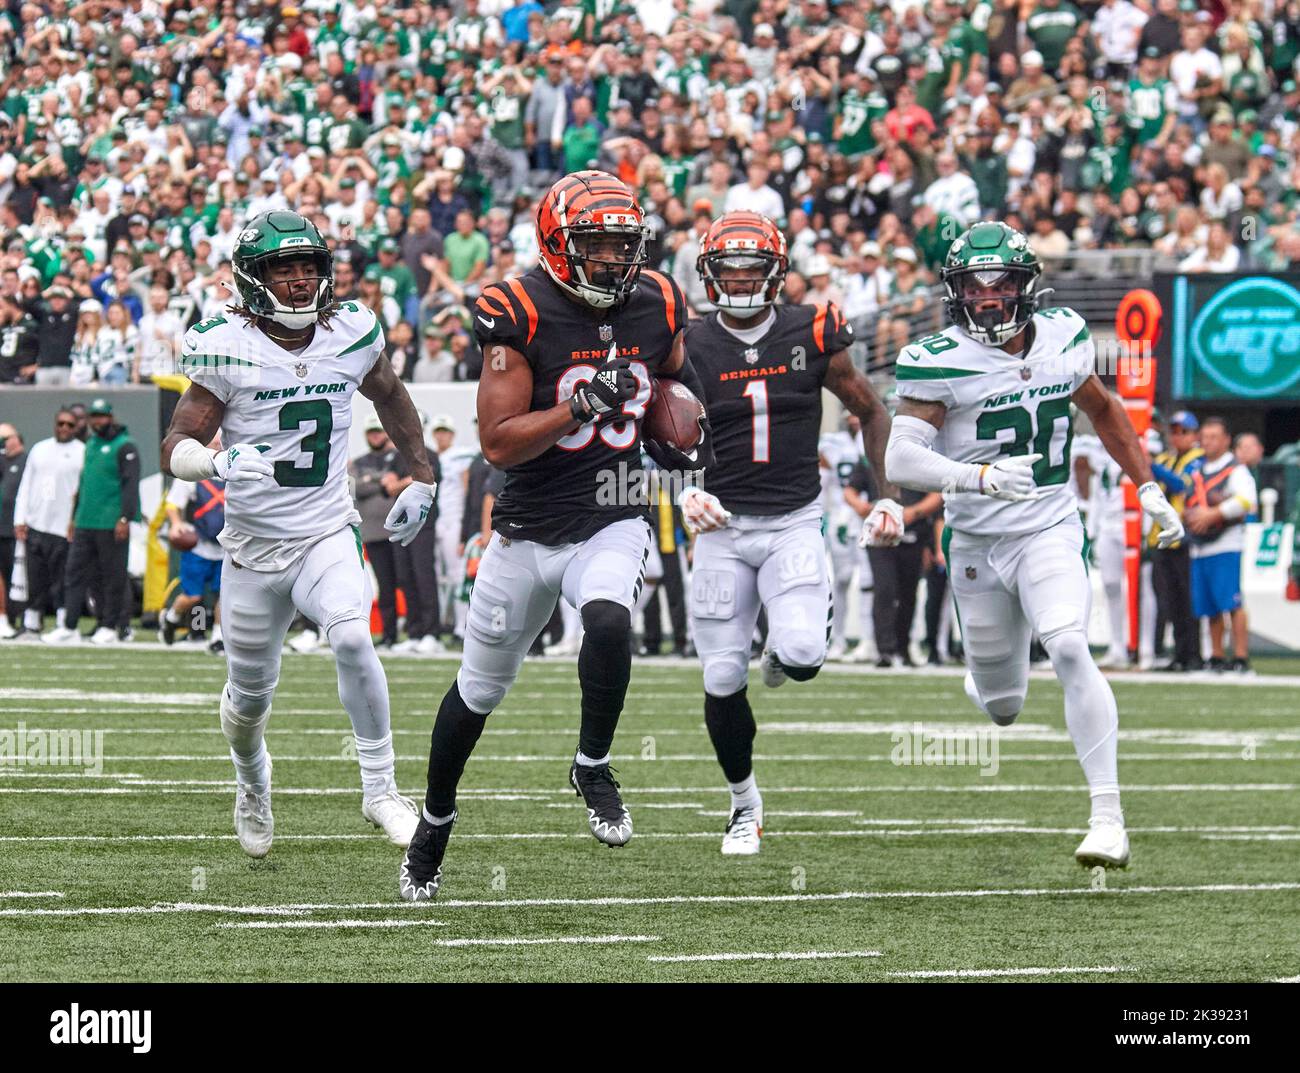 East Rutherford, New Jersey, USA. 25th Sep, 2022. Cincinnati Bengals wide receiver Tyler Boyd (83) makes a catch and run for a touchdown as New York Jets safety Jordan Whitehead (3) and cornerback Michael Carter II (30) pursues during a NFL game at MetLife Stadium in East Rutherford, New Jersey on Sunday September 25, 2022. Duncan Williams/CSM/Alamy Live News Stock Photo